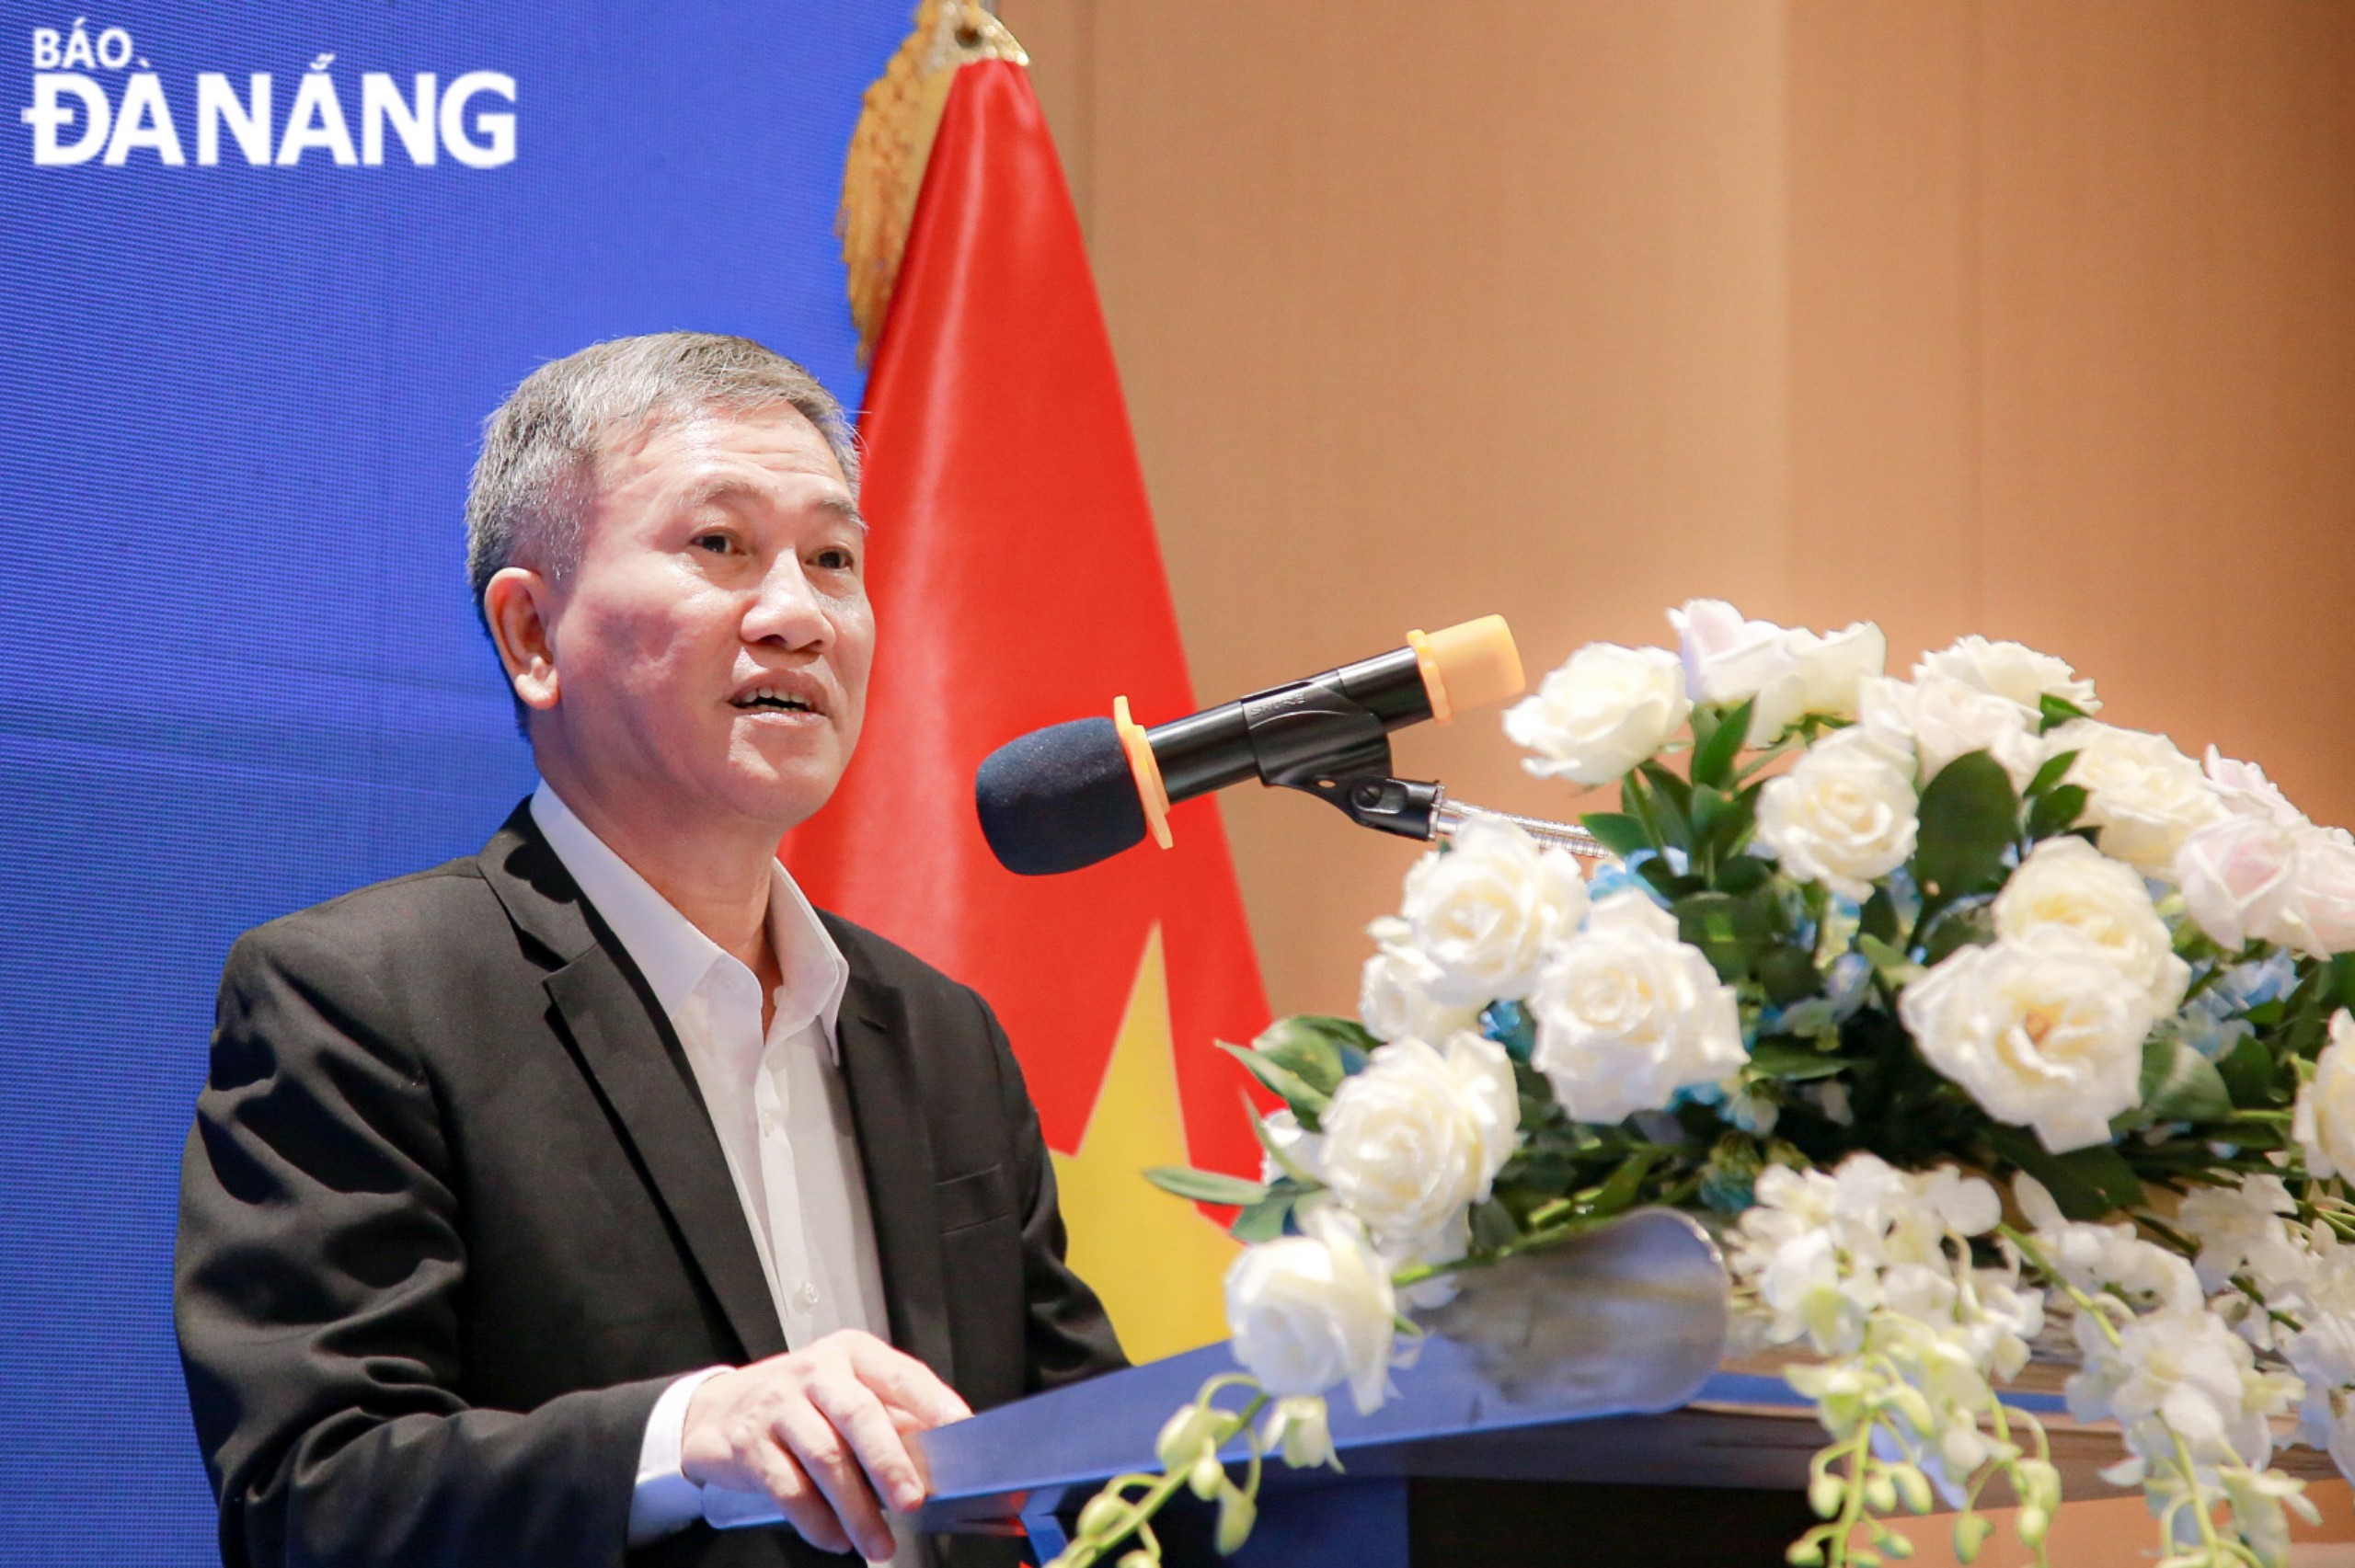 Mr. Nguyen Quang Thanh, Director of the municipal Department of Information and Communications, speaking at the forum